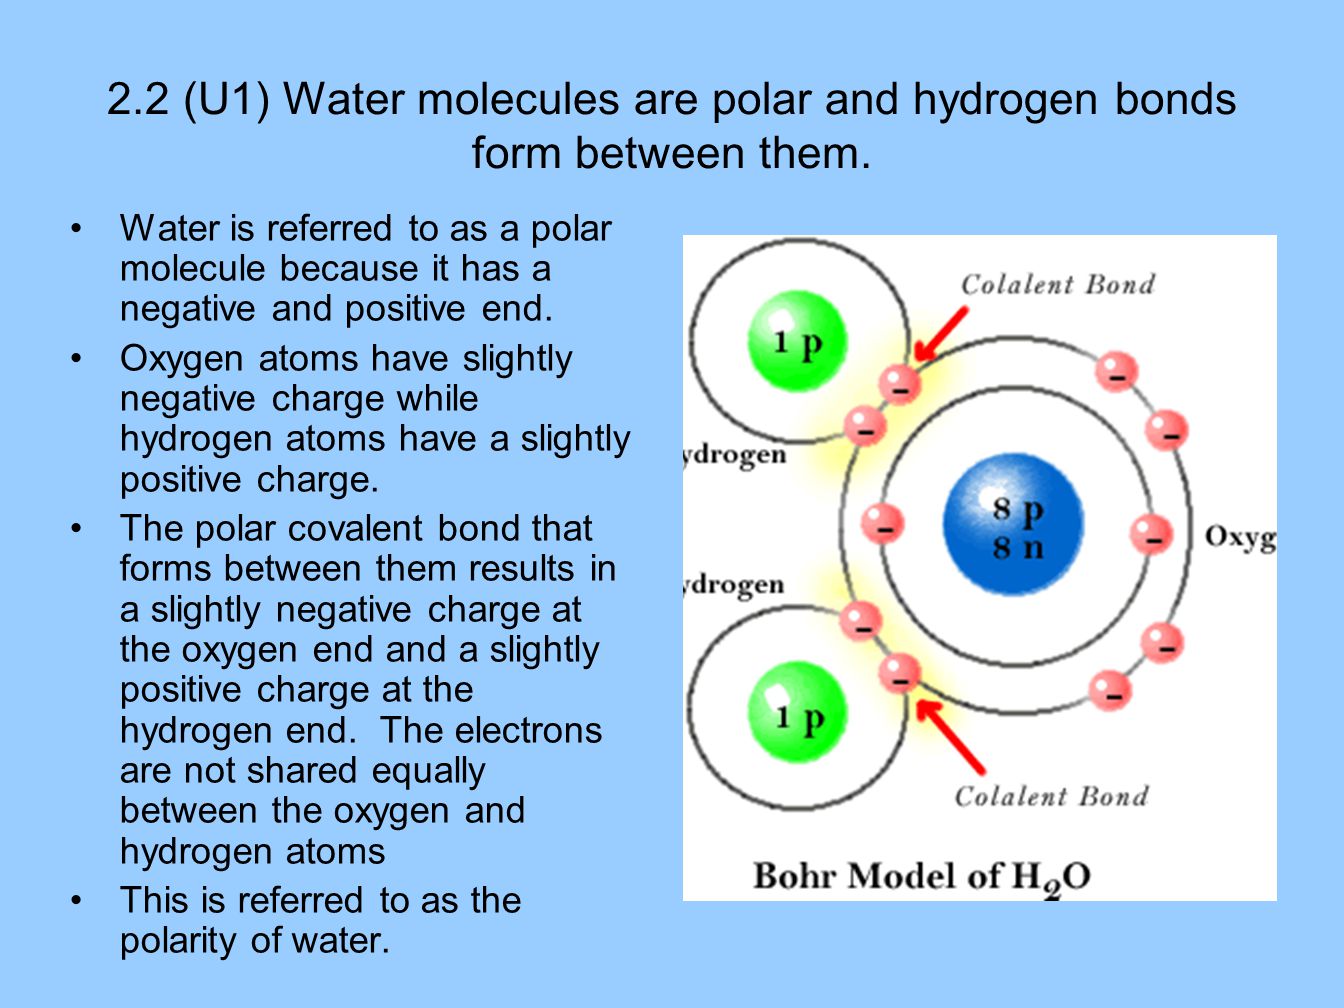 2.2 (U1) Water molecules are polar and hydrogen bonds form between them. 